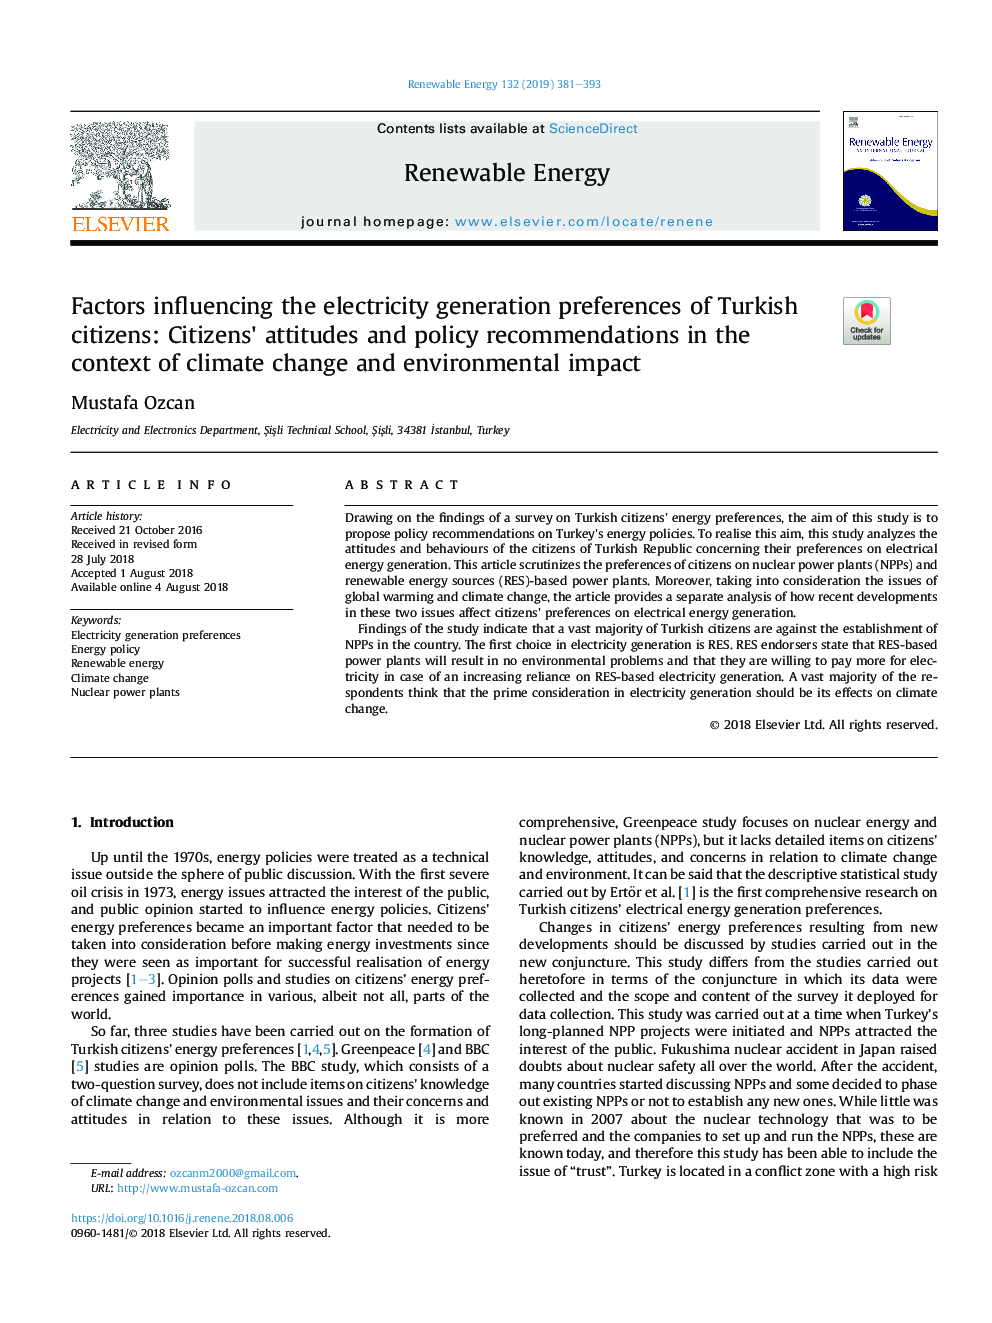 Factors influencing the electricity generation preferences of Turkish citizens: Citizens' attitudes and policy recommendations in the context of climate change and environmental impact